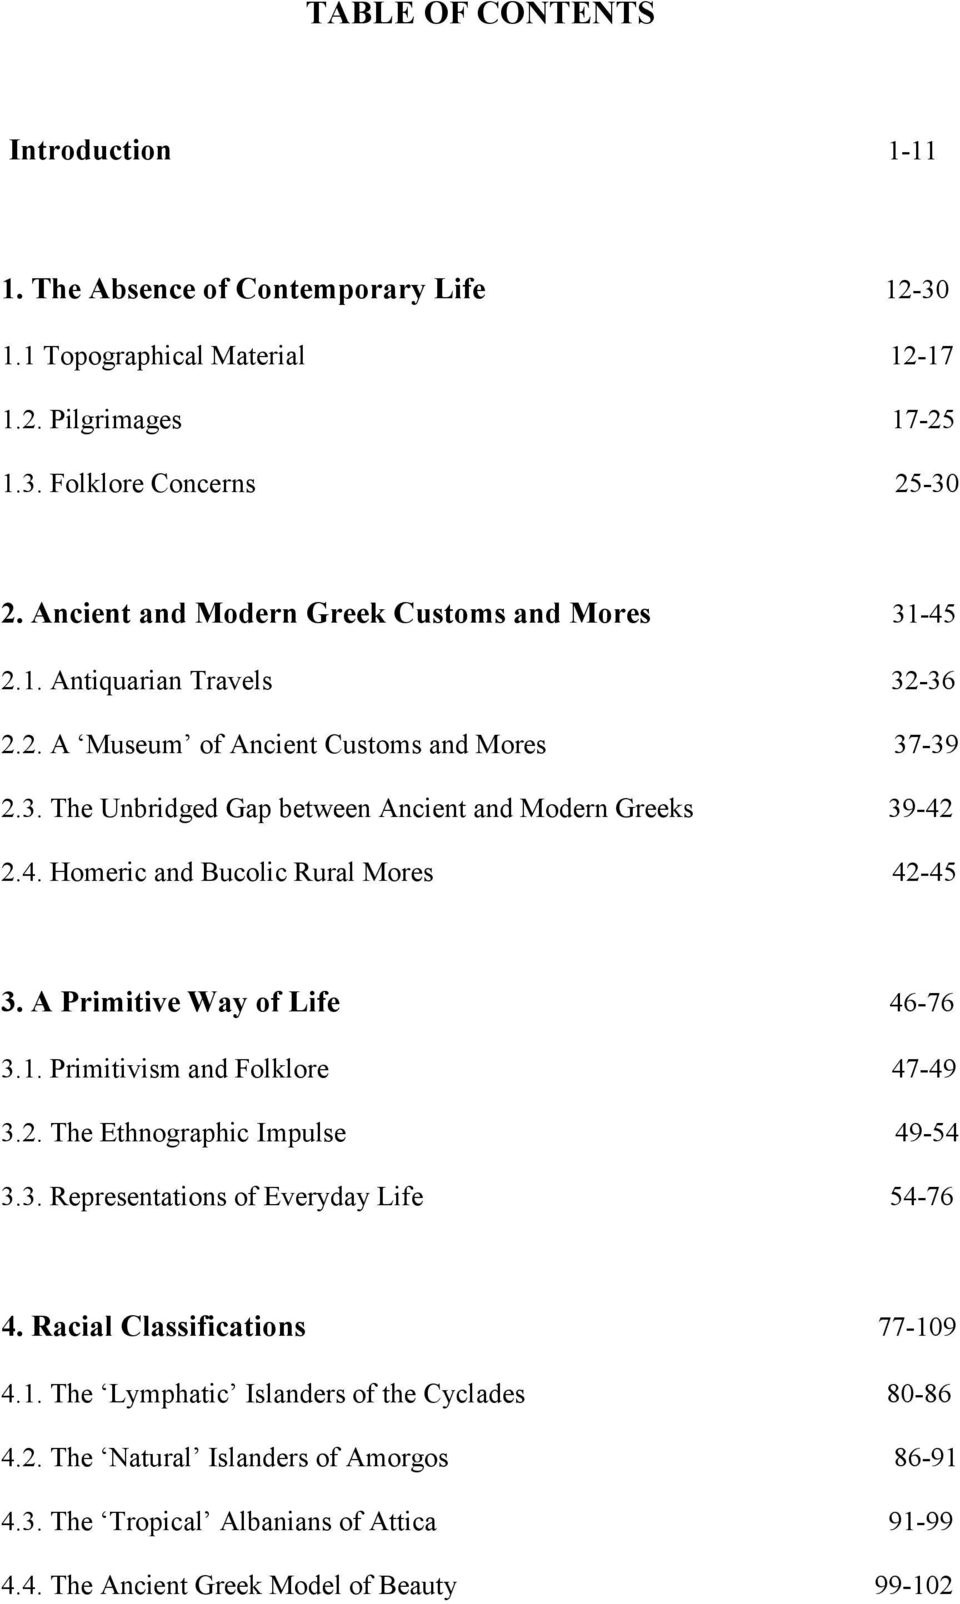 4. Homeric and Bucolic Rural Mores 42-45 3. A Primitive Way of Life 46-76 3.1. Primitivism and Folklore 47-49 3.2. The Ethnographic Impulse 49-54 3.3. Representations of Everyday Life 54-76 4.